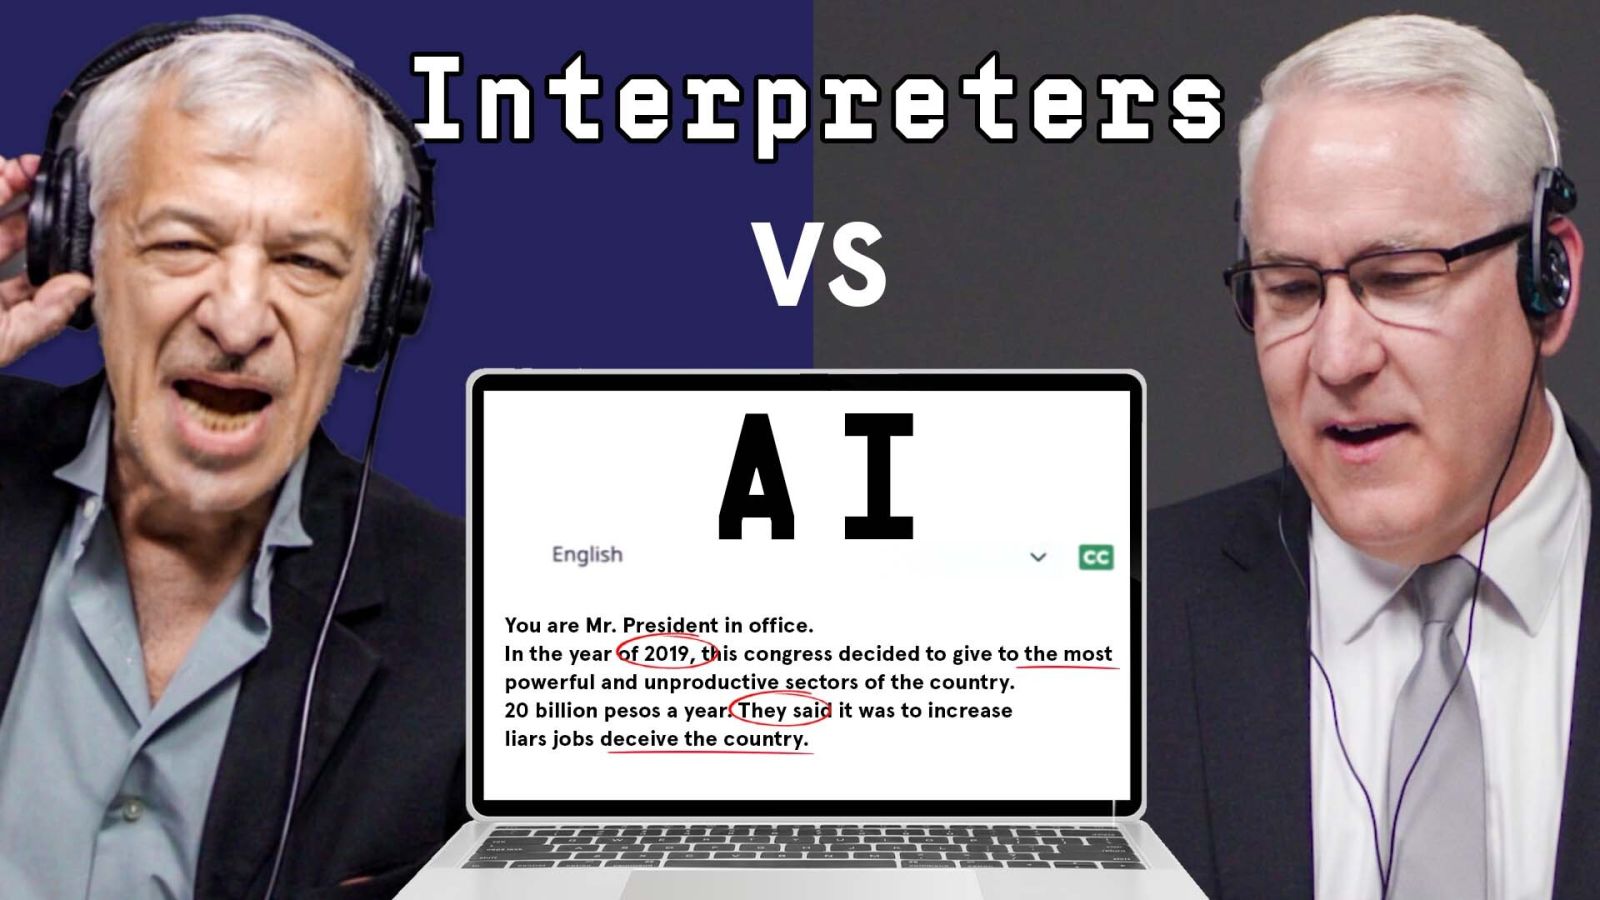 Pro Interpreters vs. AI Challenge: Who Translates Faster and Better?